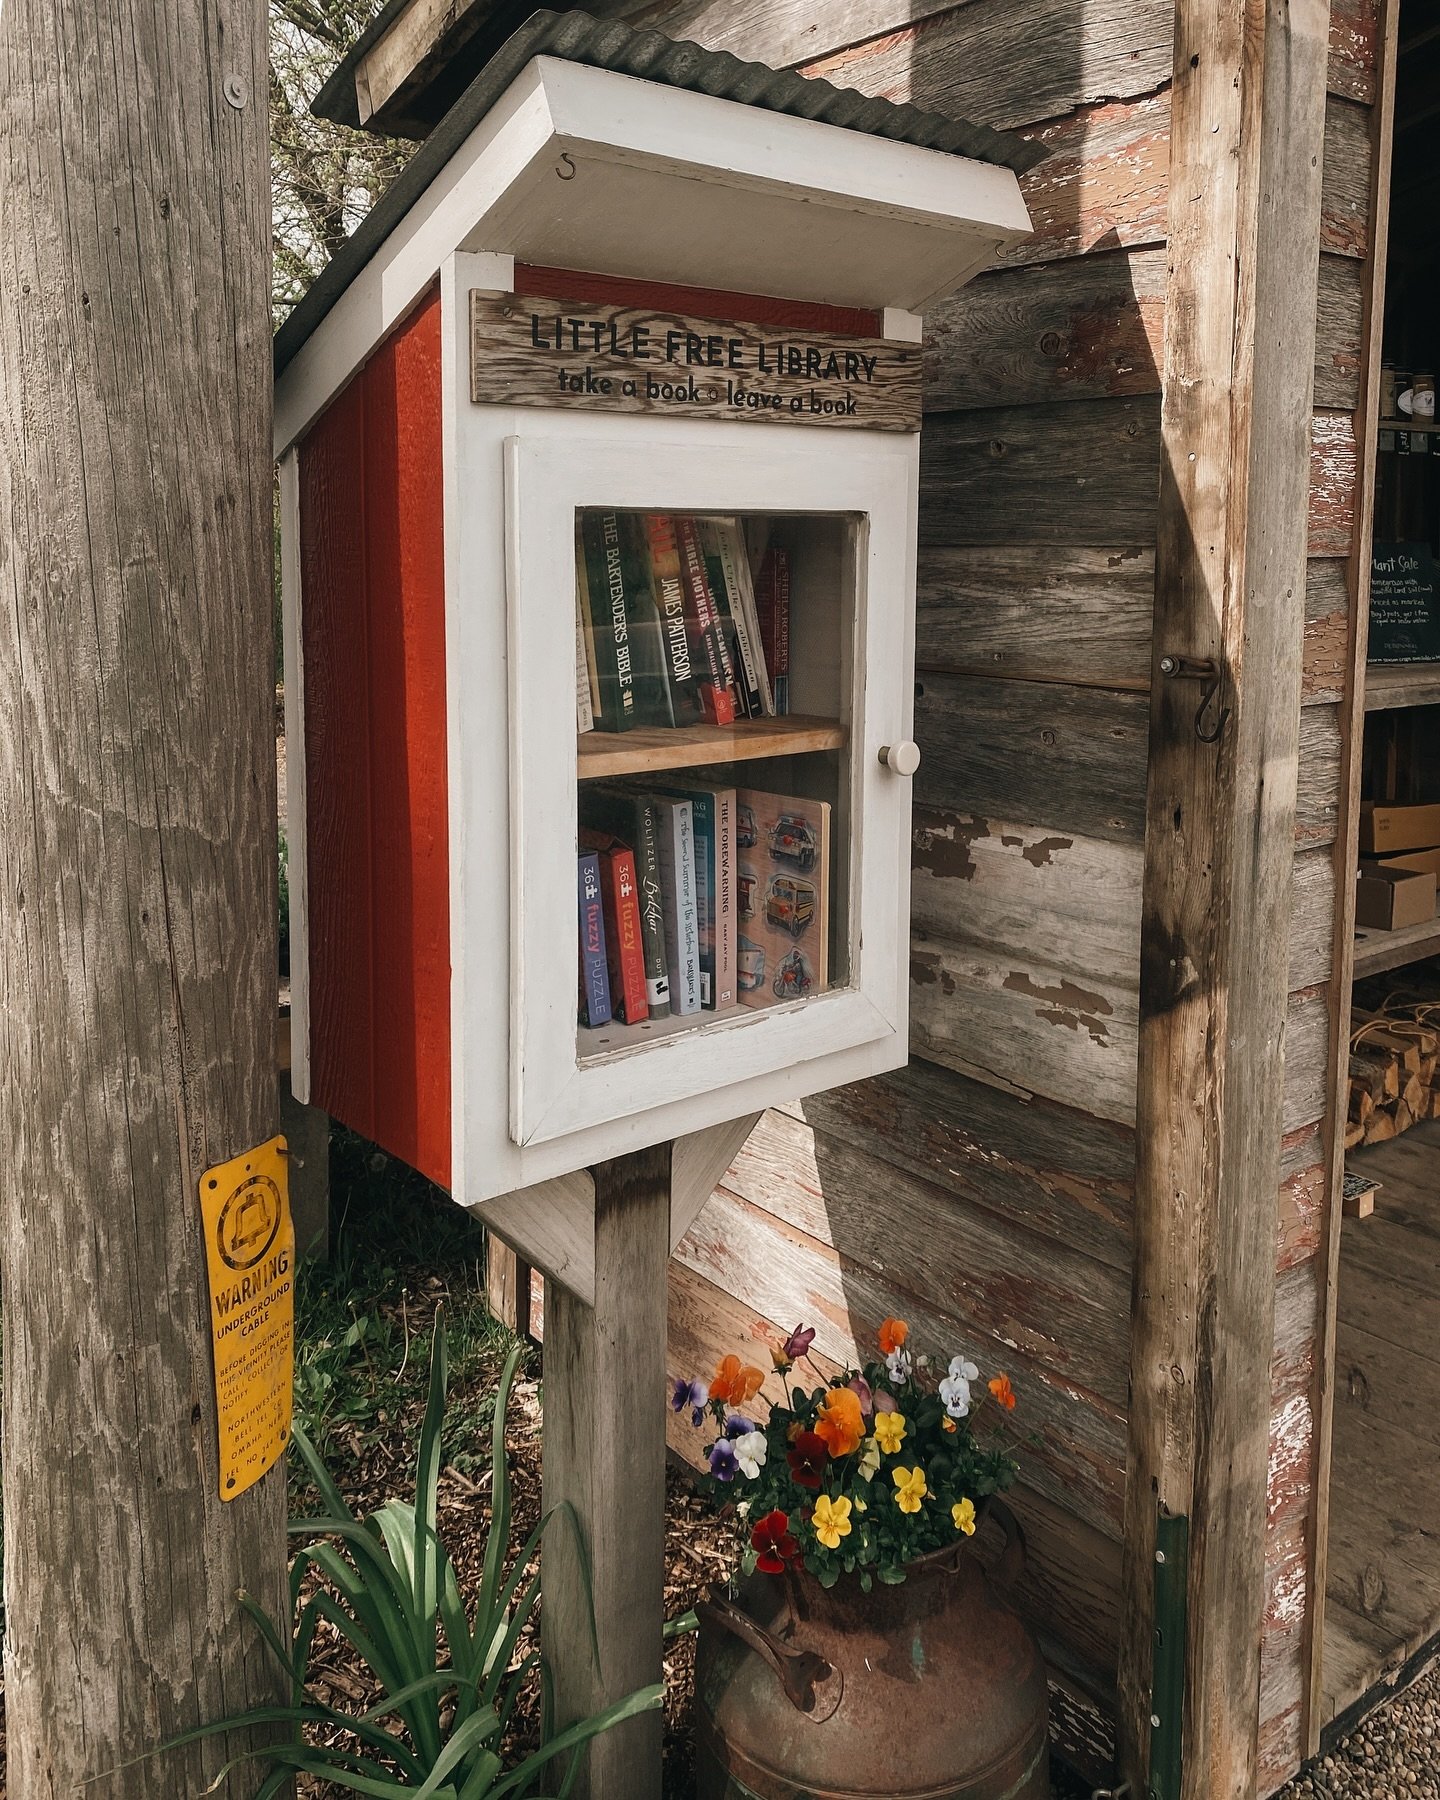 ✨ Little Free Library appreciation post ✨

We&rsquo;ve had this little free library for several years now, and we think it&rsquo;s the perfect addition to our honor system farmstand. From it, we&rsquo;ve read lots of good books over the years and it&